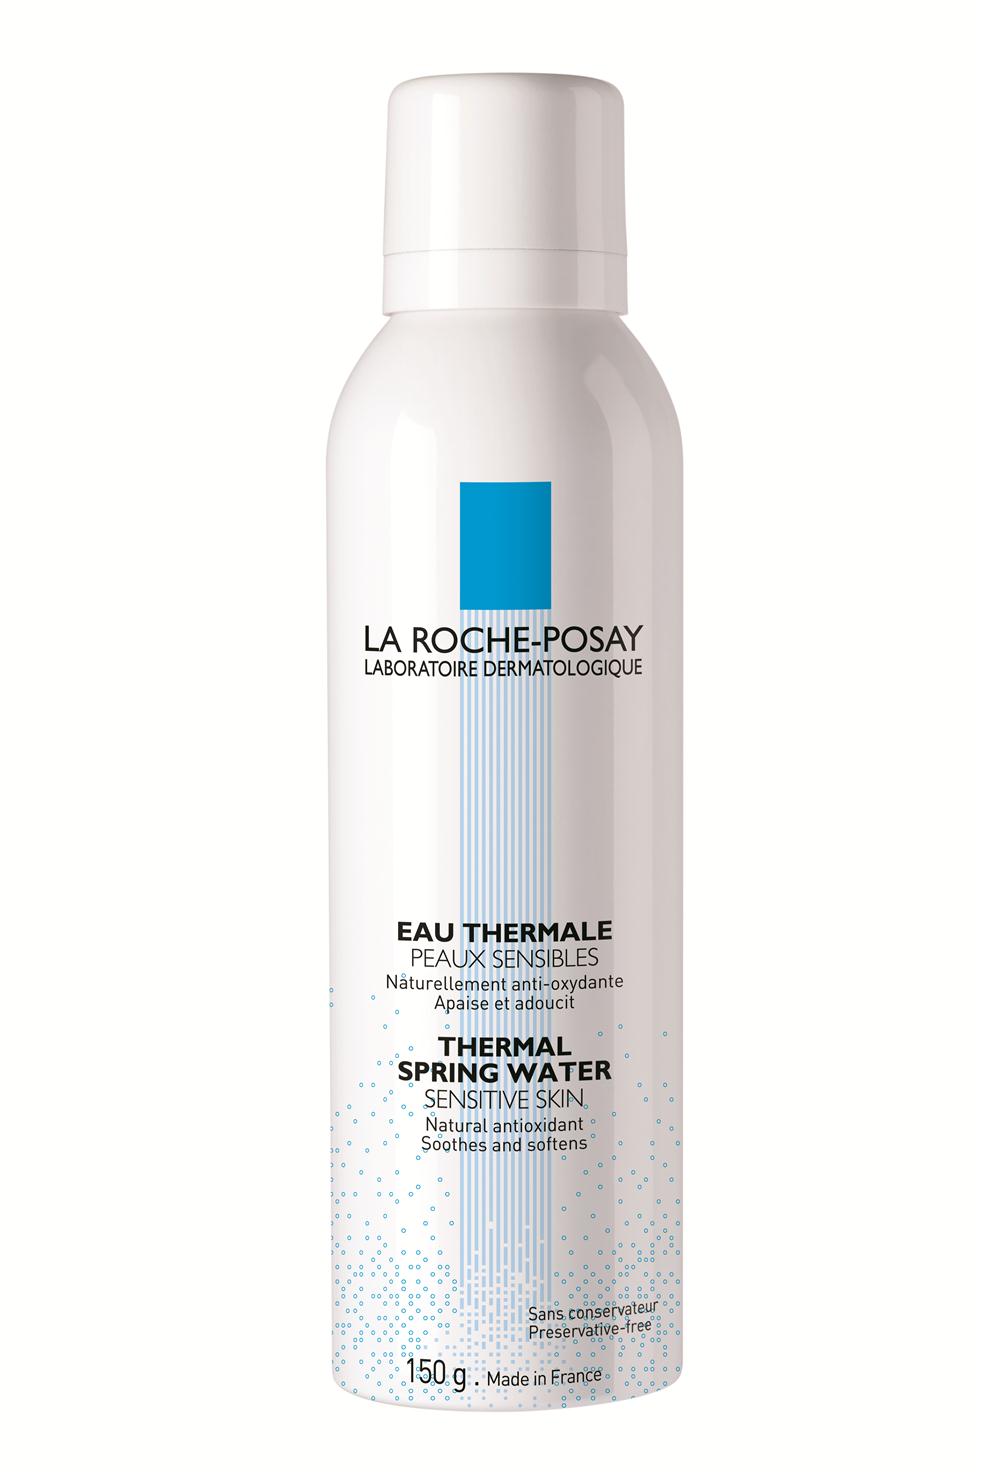 La Roche Posay Thermal Spring Water - 150g